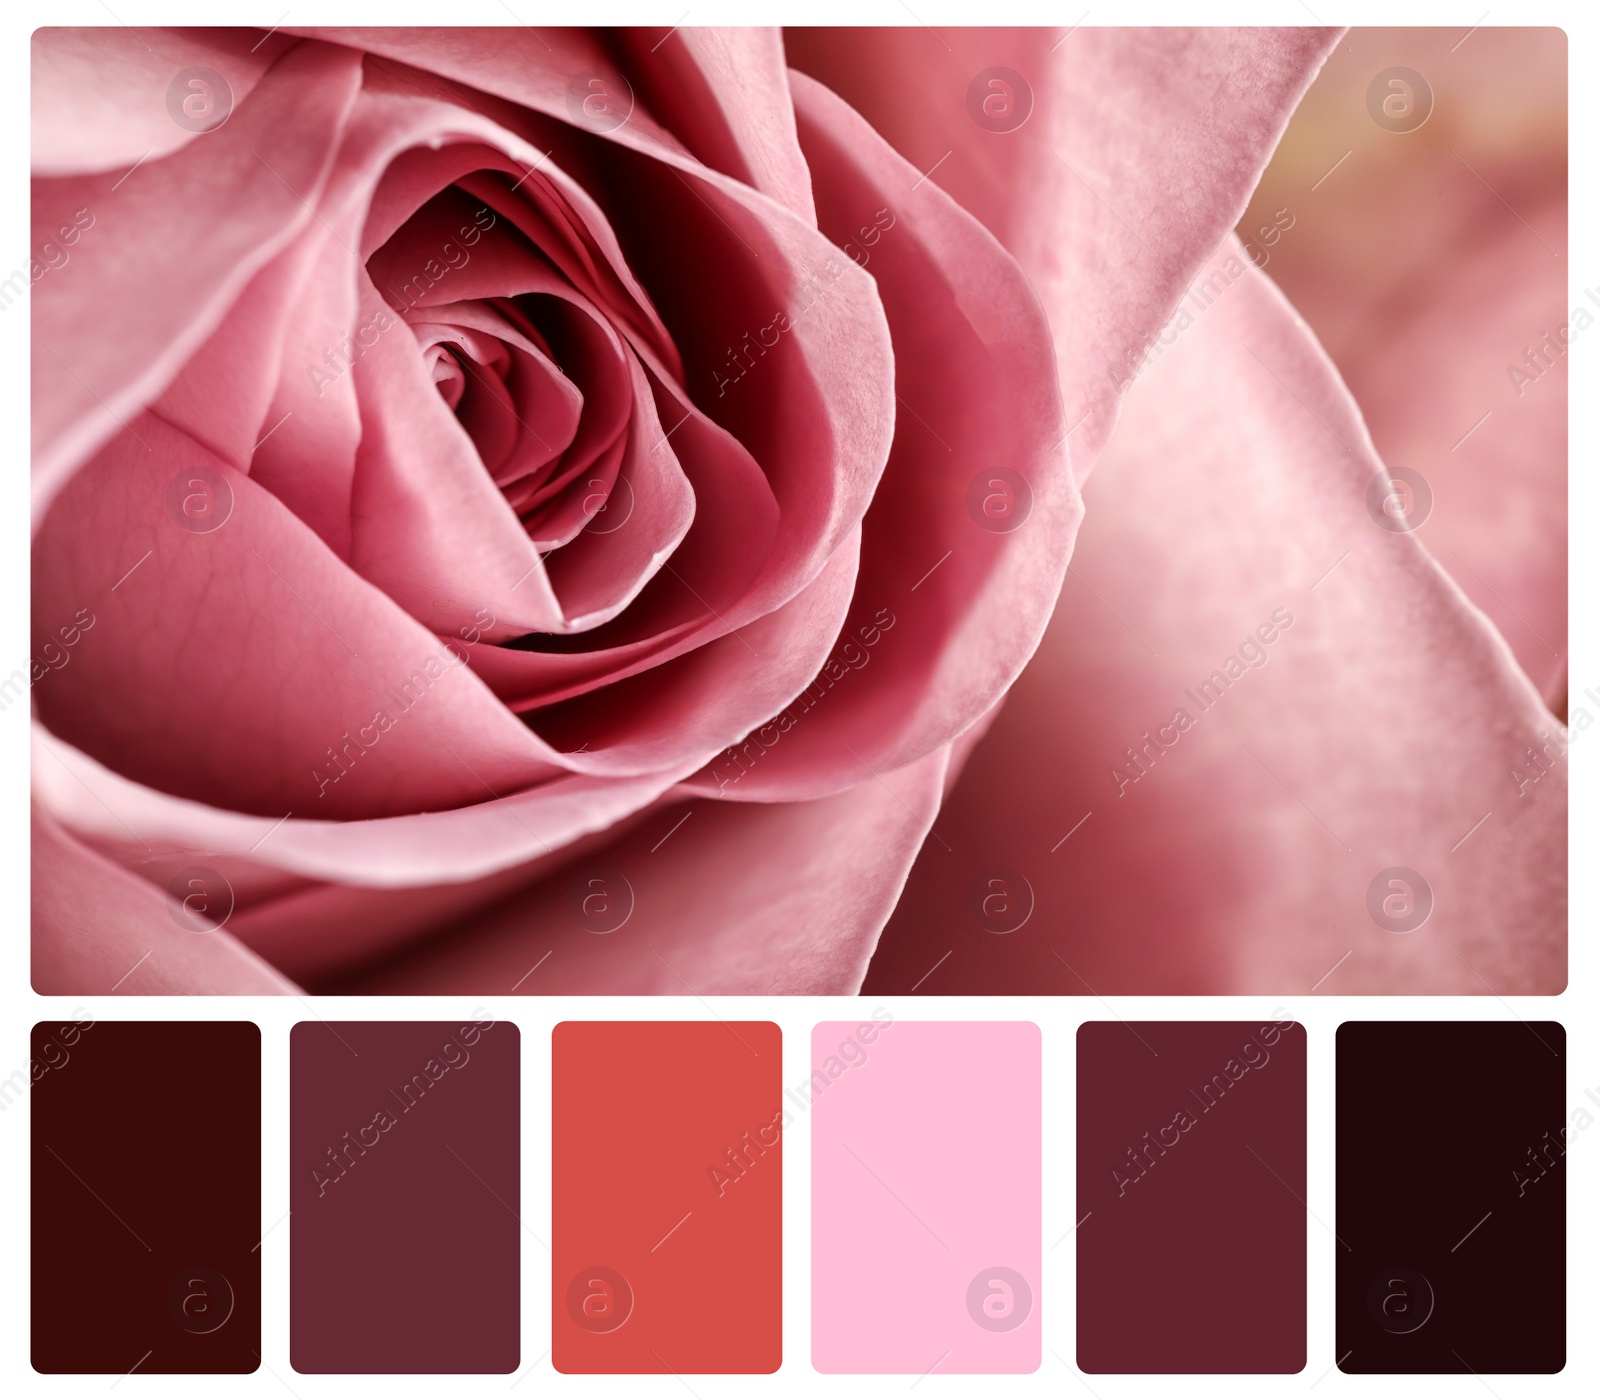 Image of Beautiful fresh rose and color palette. Collage